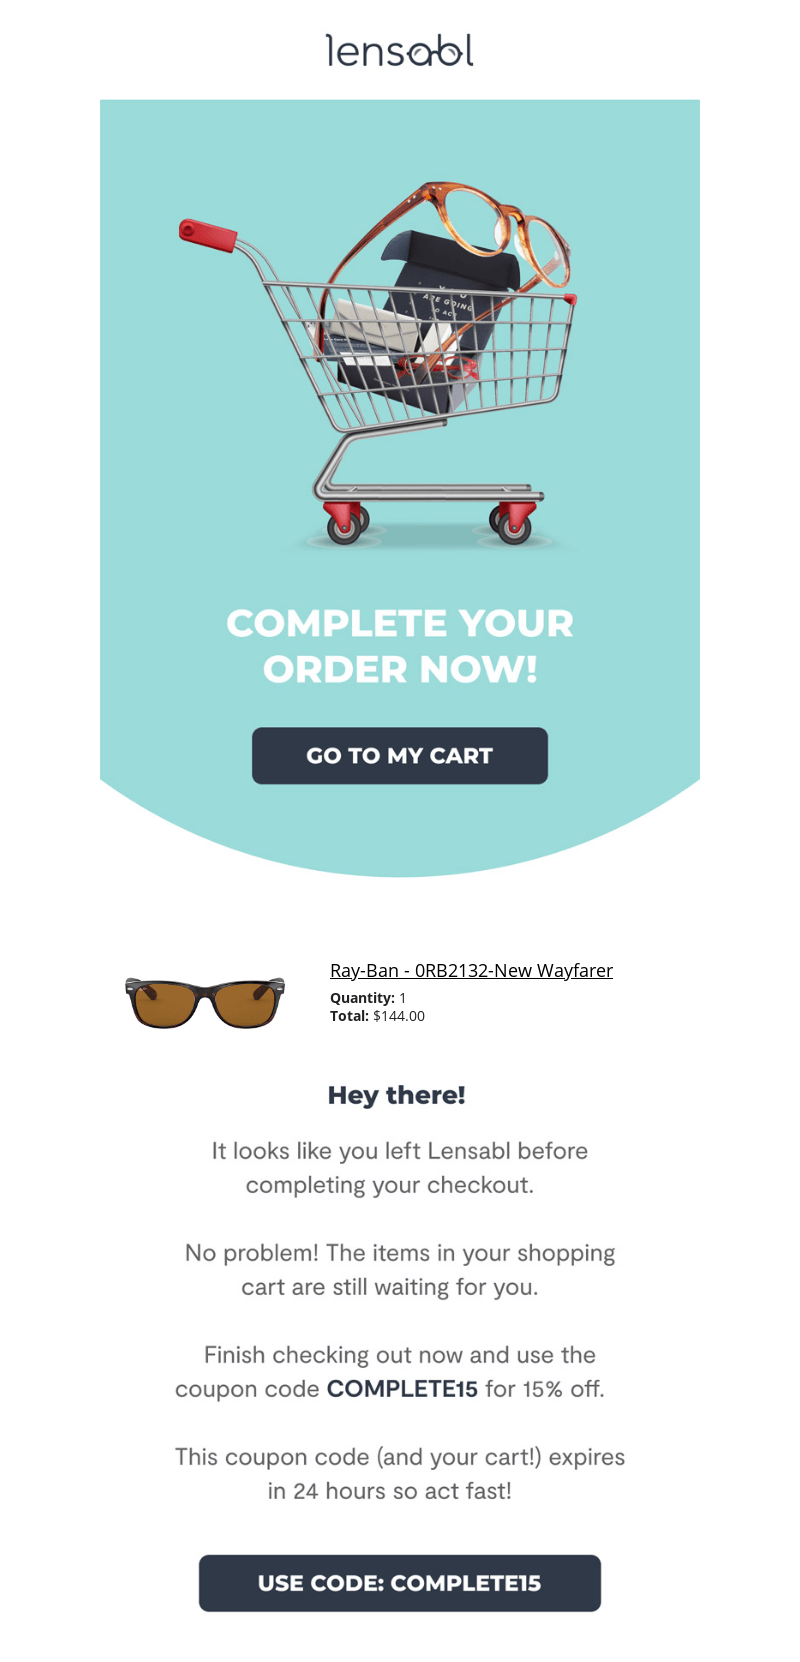 A cart abandonment email from Lensabl. The email features a large CTA button at the top and offers a limited-time promotional code to encourage the customer to complete the purchase.